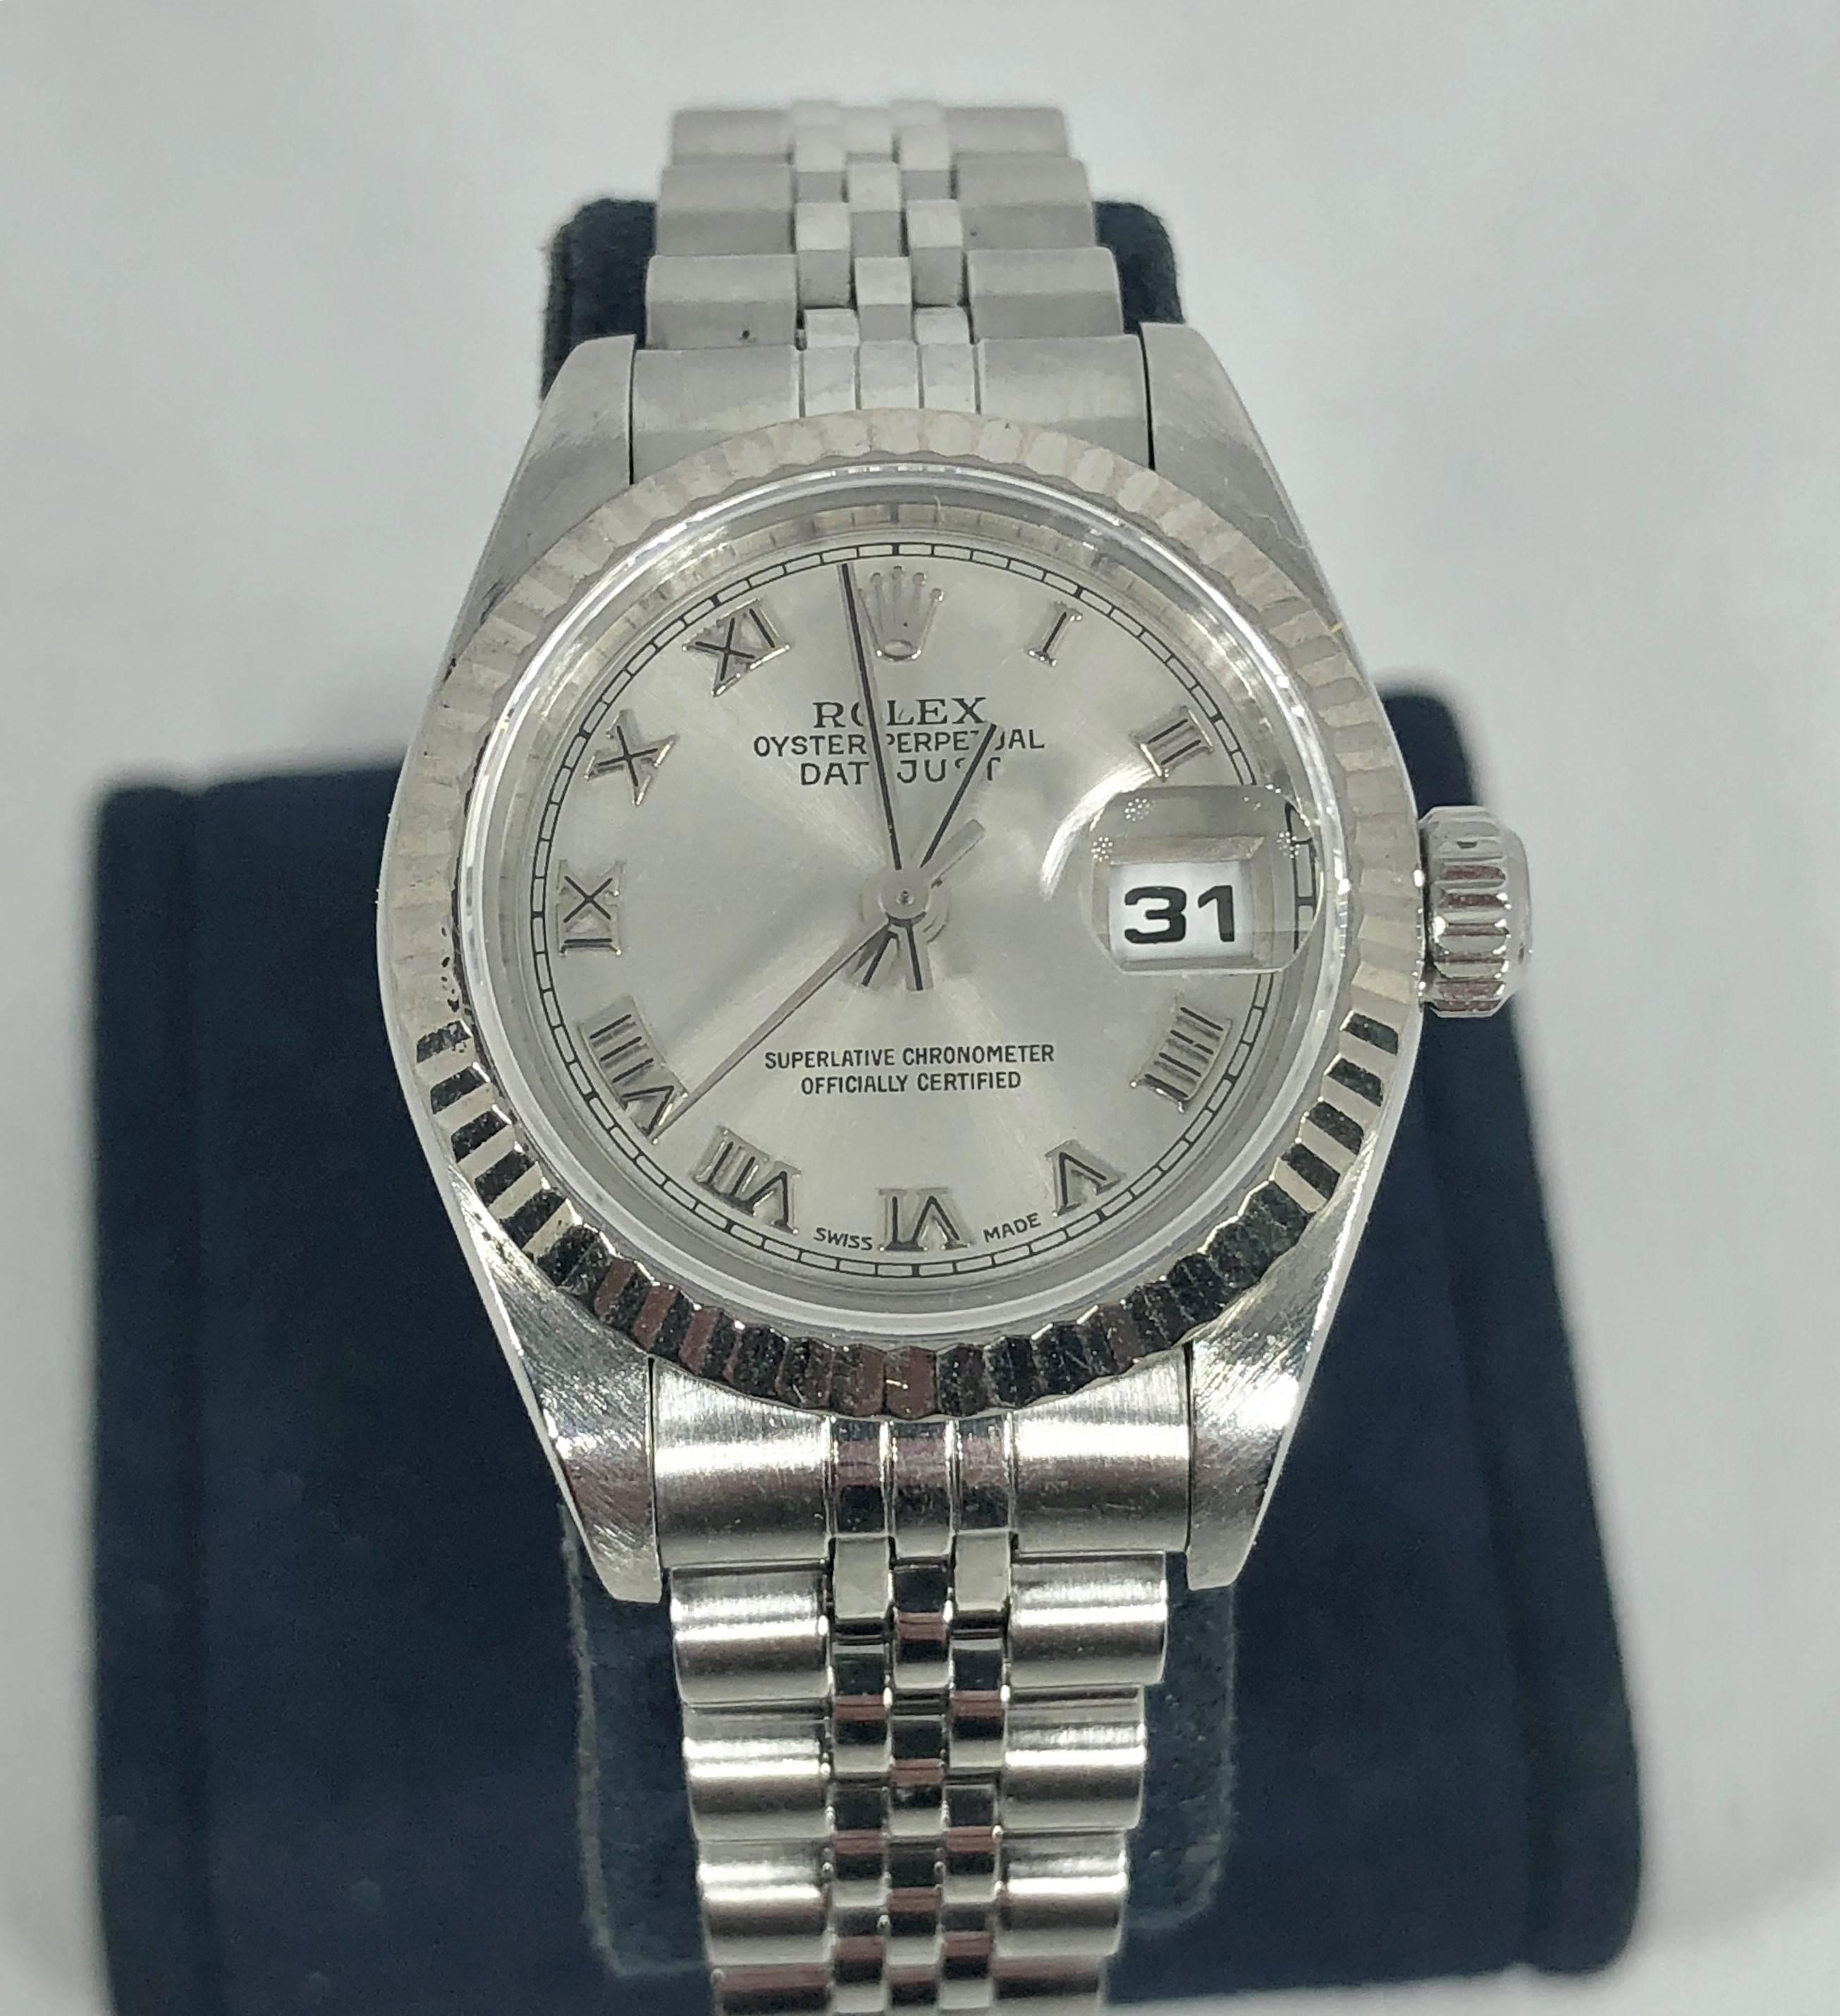 Rolex women's stainless steel and 18 karat Oyster perpetual Datejust wristwatch. Style #79174 serial # A989160. Circa 1999. Stainless steel and 18 karat white gold fluted bezel, 26 MM. Grey dial with roman numerals. Automatic movement with scratch